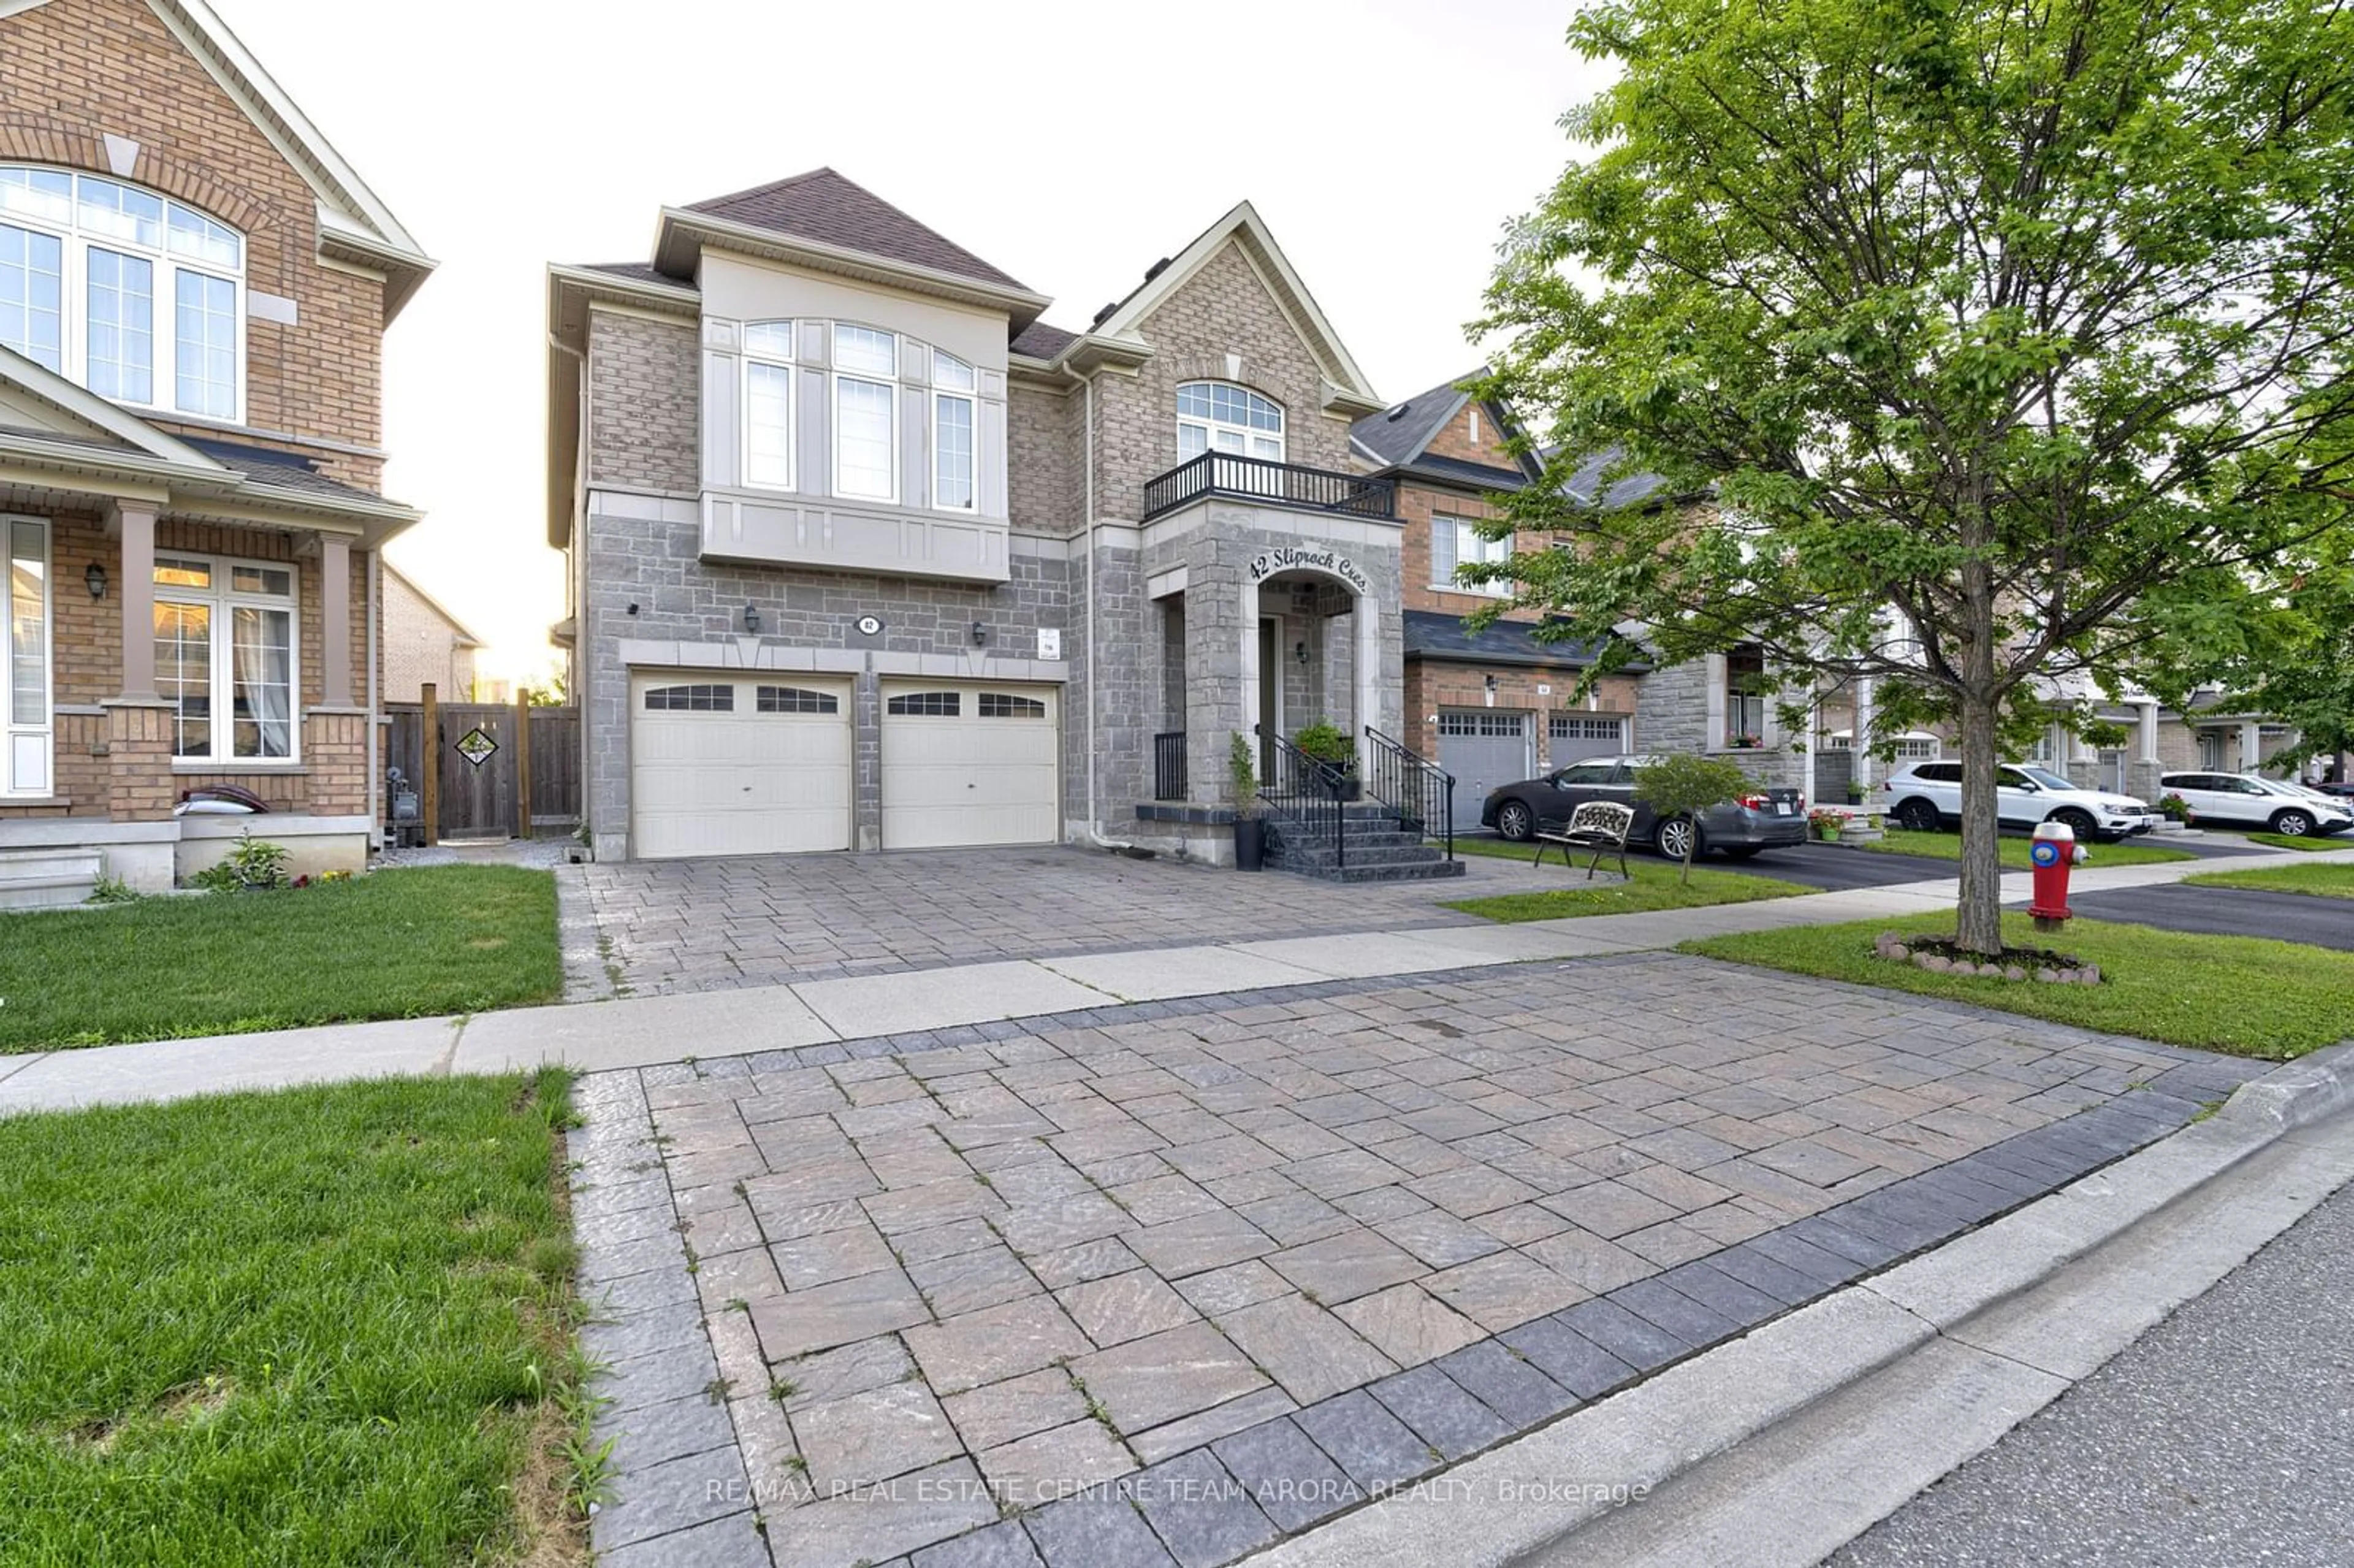 Home with brick exterior material for 42 Sliprock Cres, Brampton Ontario L6Y 0W8